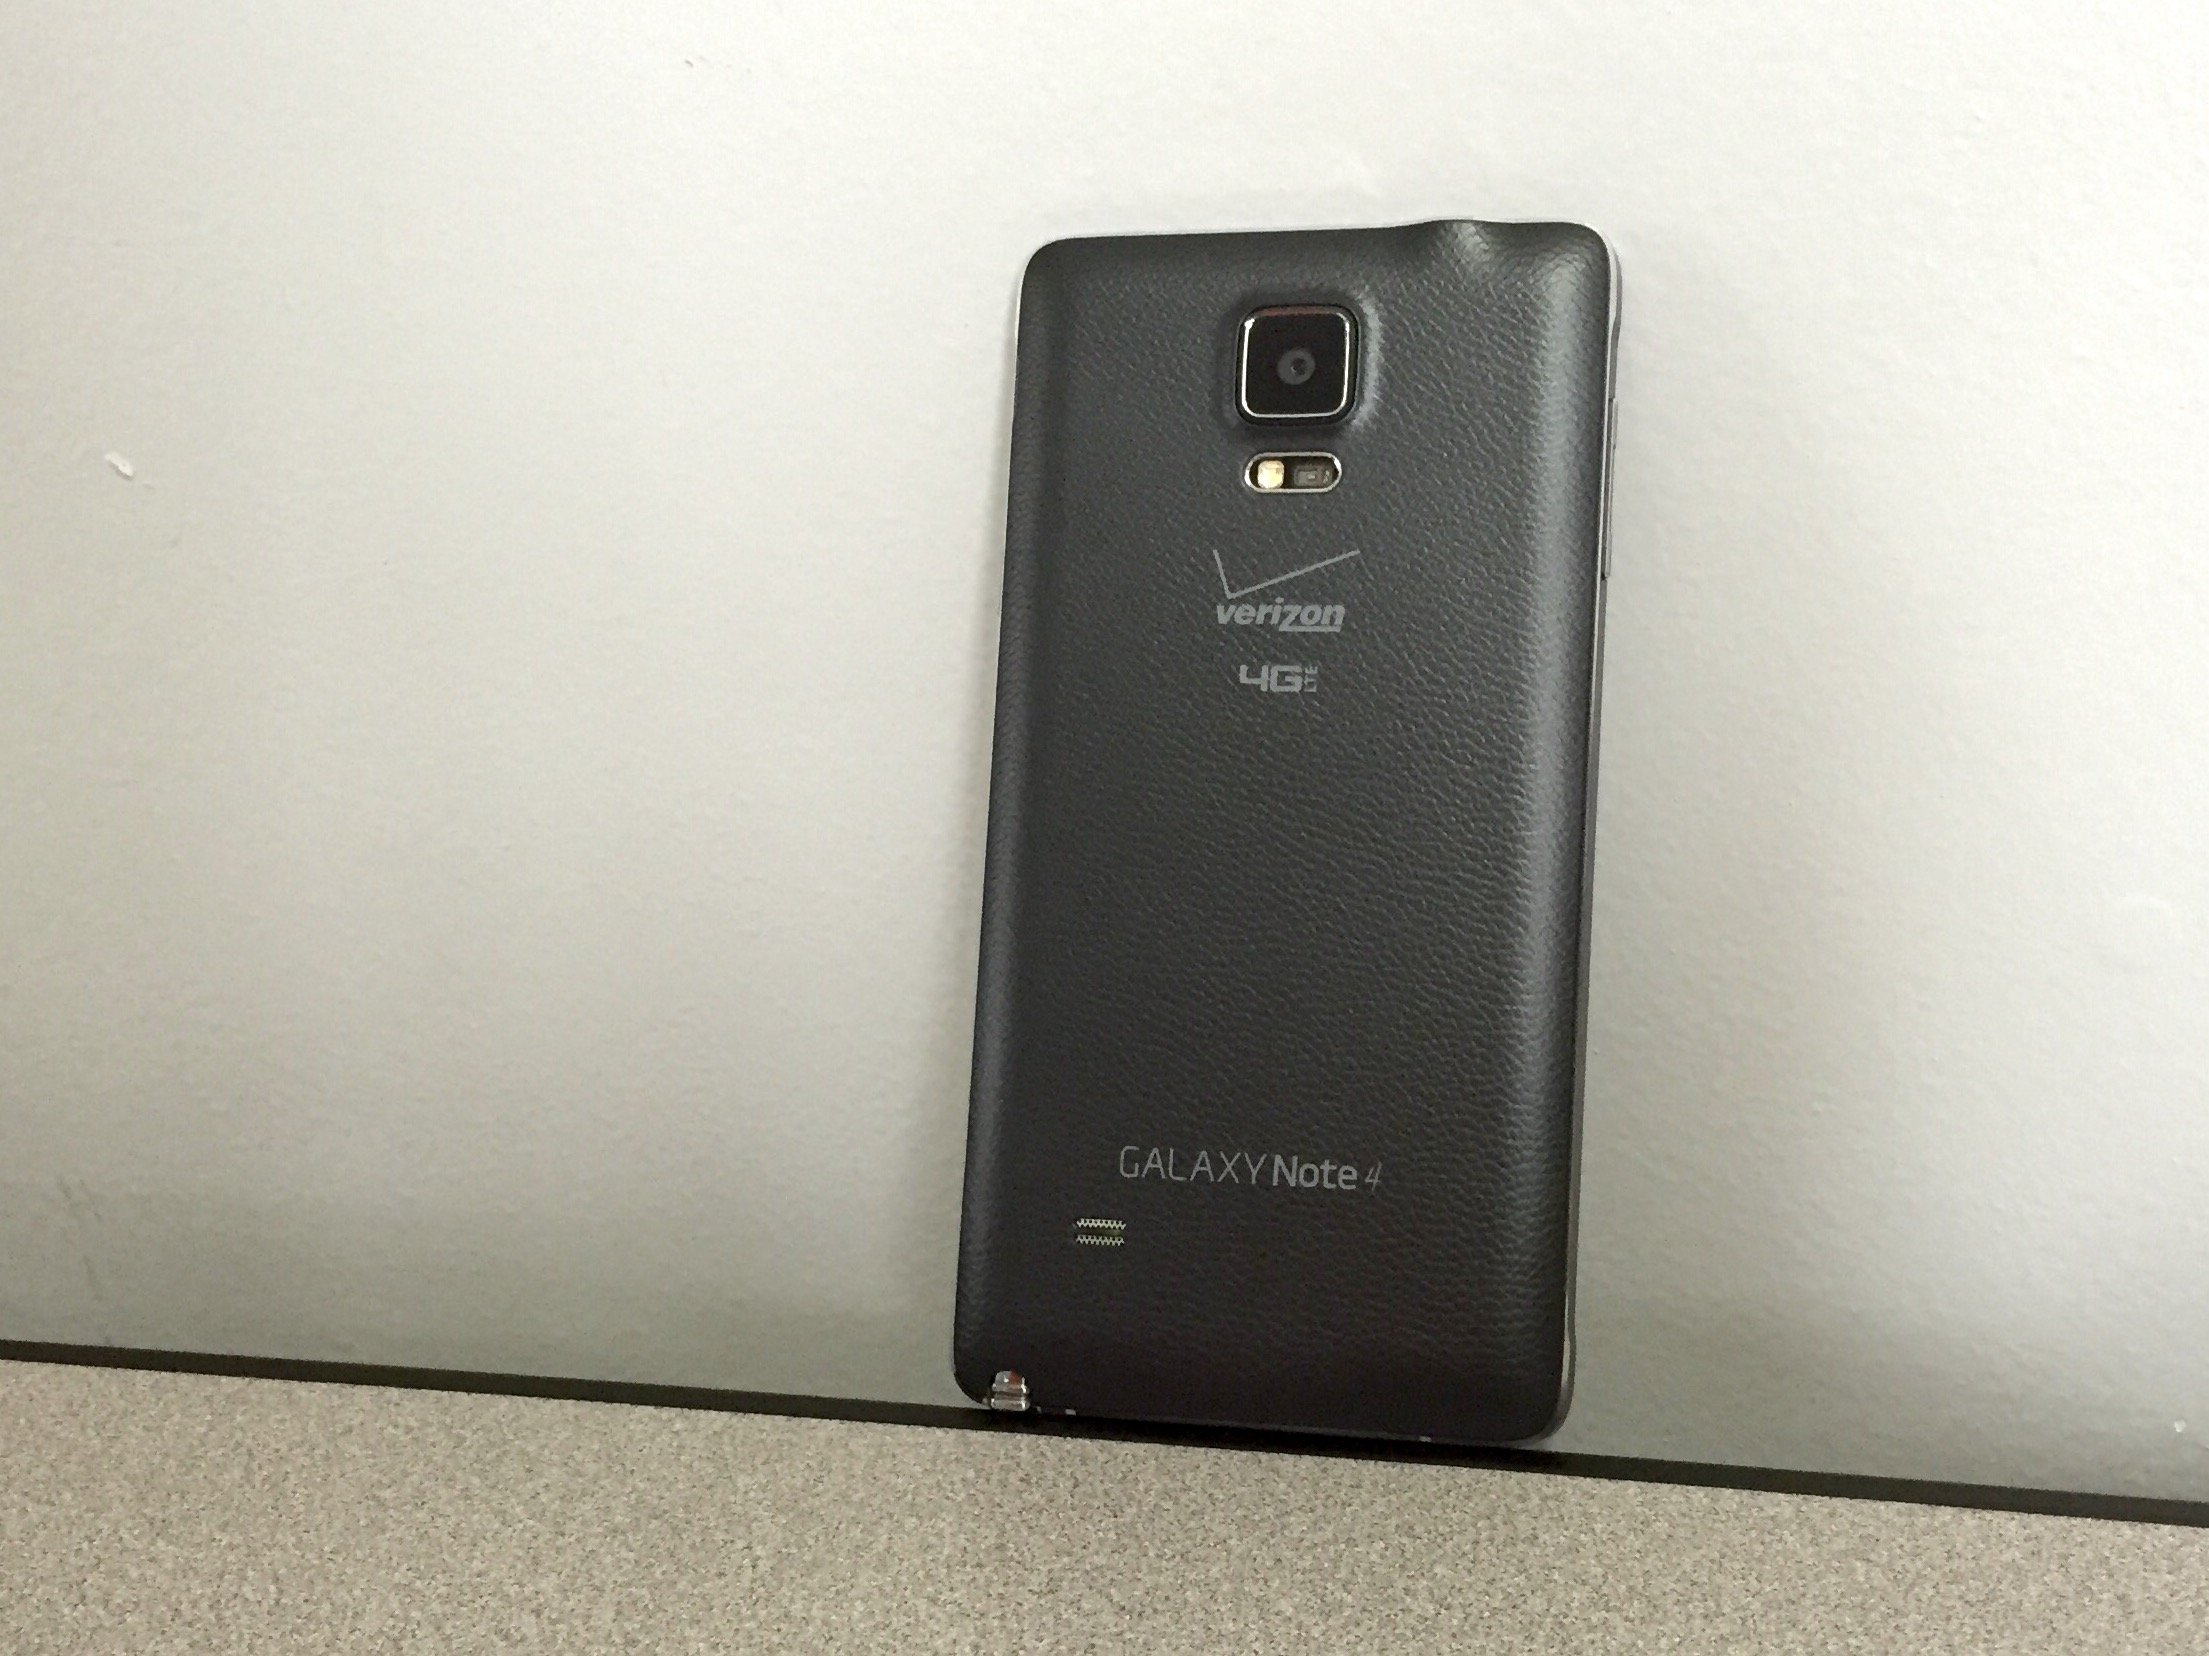 The Verizon Galaxy note 4 Android 5.0.1 update installation was smooth.